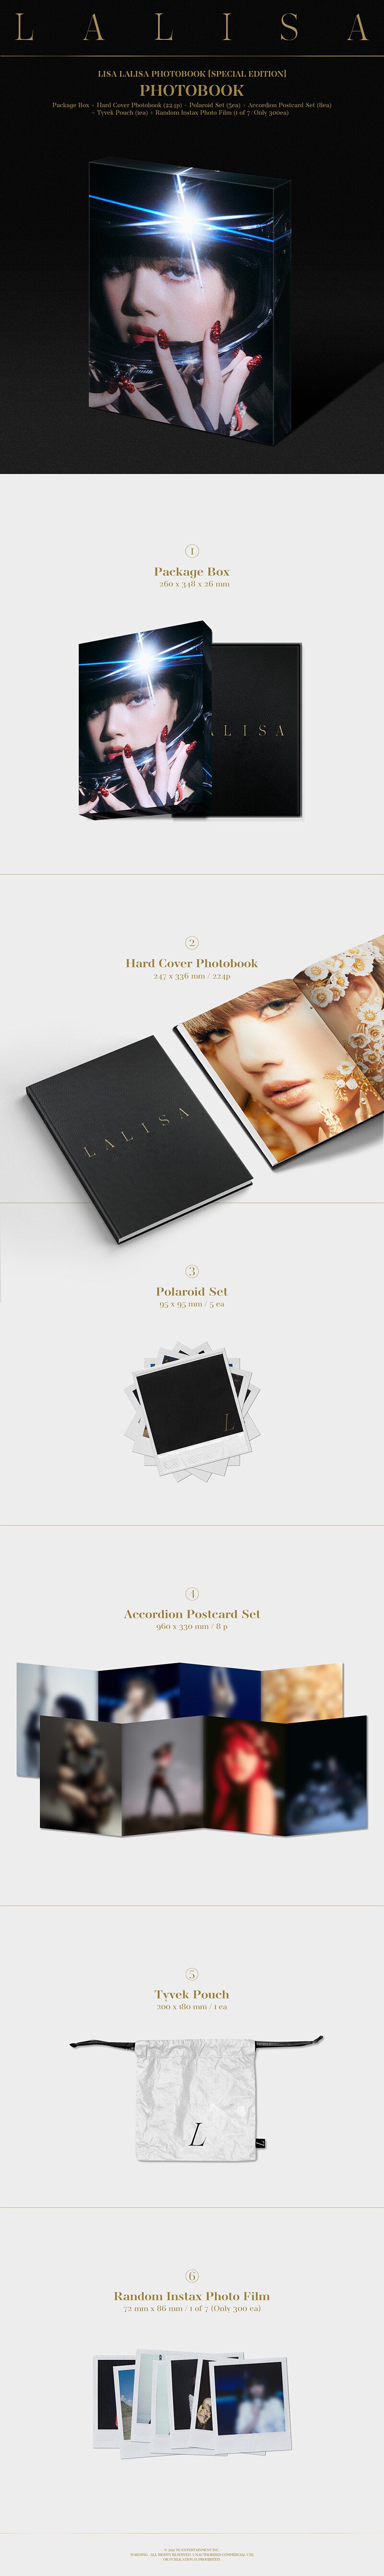 LISA 'LALISA PHOTO BOOK' (SPECIAL EDITION) detail